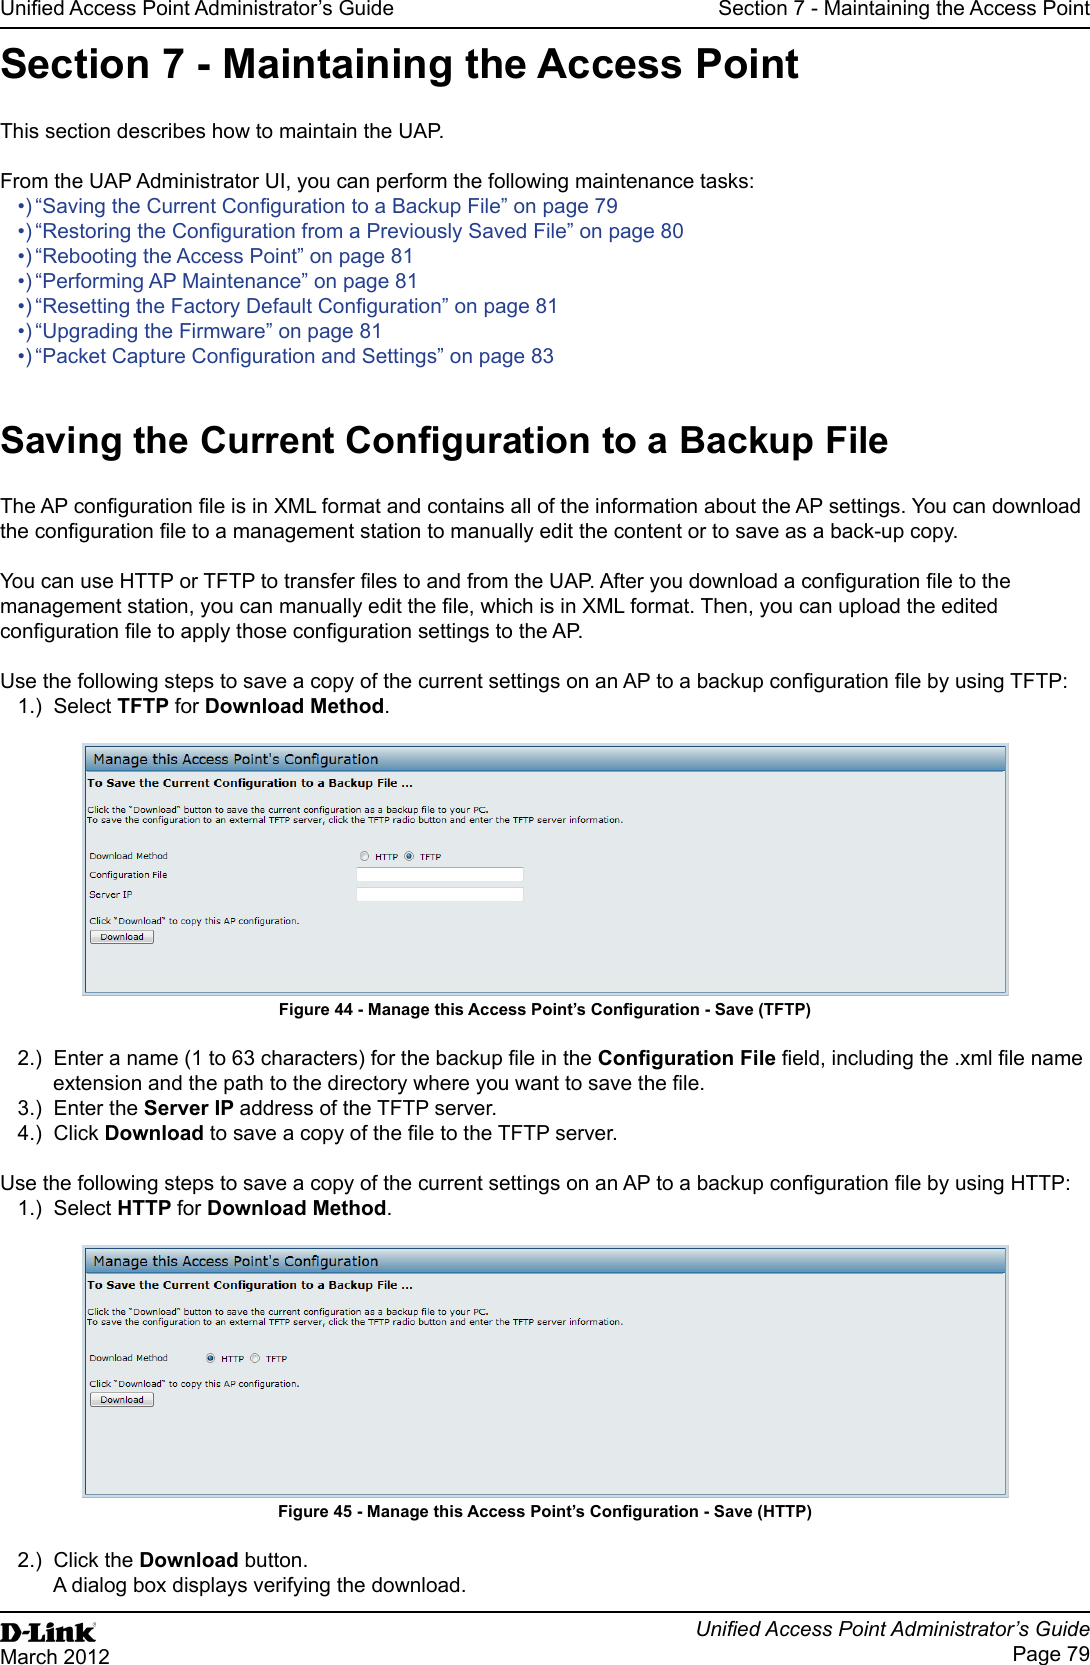 Unied Access Point Administrator’s GuideUnied Access Point Administrator’s GuidePage 79March 2012Section 7 - Maintaining the Access PointSection 7 - Maintaining the Access PointThis section describes how to maintain the UAP.From the UAP Administrator UI, you can perform the following maintenance tasks:•) “Saving the Current Conguration to a Backup File” on page 79•) “Restoring the Conguration from a Previously Saved File” on page 80•) “Rebooting the Access Point” on page 81•) “Performing AP Maintenance” on page 81•) “Resetting the Factory Default Conguration” on page 81•) “Upgrading the Firmware” on page 81•) “Packet Capture Conguration and Settings” on page 83Saving the Current Conguration to a Backup FileThe AP conguration le is in XML format and contains all of the information about the AP settings. You can download the conguration le to a management station to manually edit the content or to save as a back-up copy. You can use HTTP or TFTP to transfer les to and from the UAP. After you download a conguration le to the management station, you can manually edit the le, which is in XML format. Then, you can upload the edited conguration le to apply those conguration settings to the AP.Use the following steps to save a copy of the current settings on an AP to a backup conguration le by using TFTP:1.)  Select TFTP for Download Method.Figure 44 - Manage this Access Point’s Conguration - Save (TFTP)2.)  Enter a name (1 to 63 characters) for the backup le in the Conguration File eld, including the .xml le name extension and the path to the directory where you want to save the le.3.)  Enter the Server IP address of the TFTP server.4.)  Click Download to save a copy of the le to the TFTP server.Use the following steps to save a copy of the current settings on an AP to a backup conguration le by using HTTP:1.)  Select HTTP for Download Method.Figure 45 - Manage this Access Point’s Conguration - Save (HTTP)2.)  Click the Download button.A dialog box displays verifying the download.